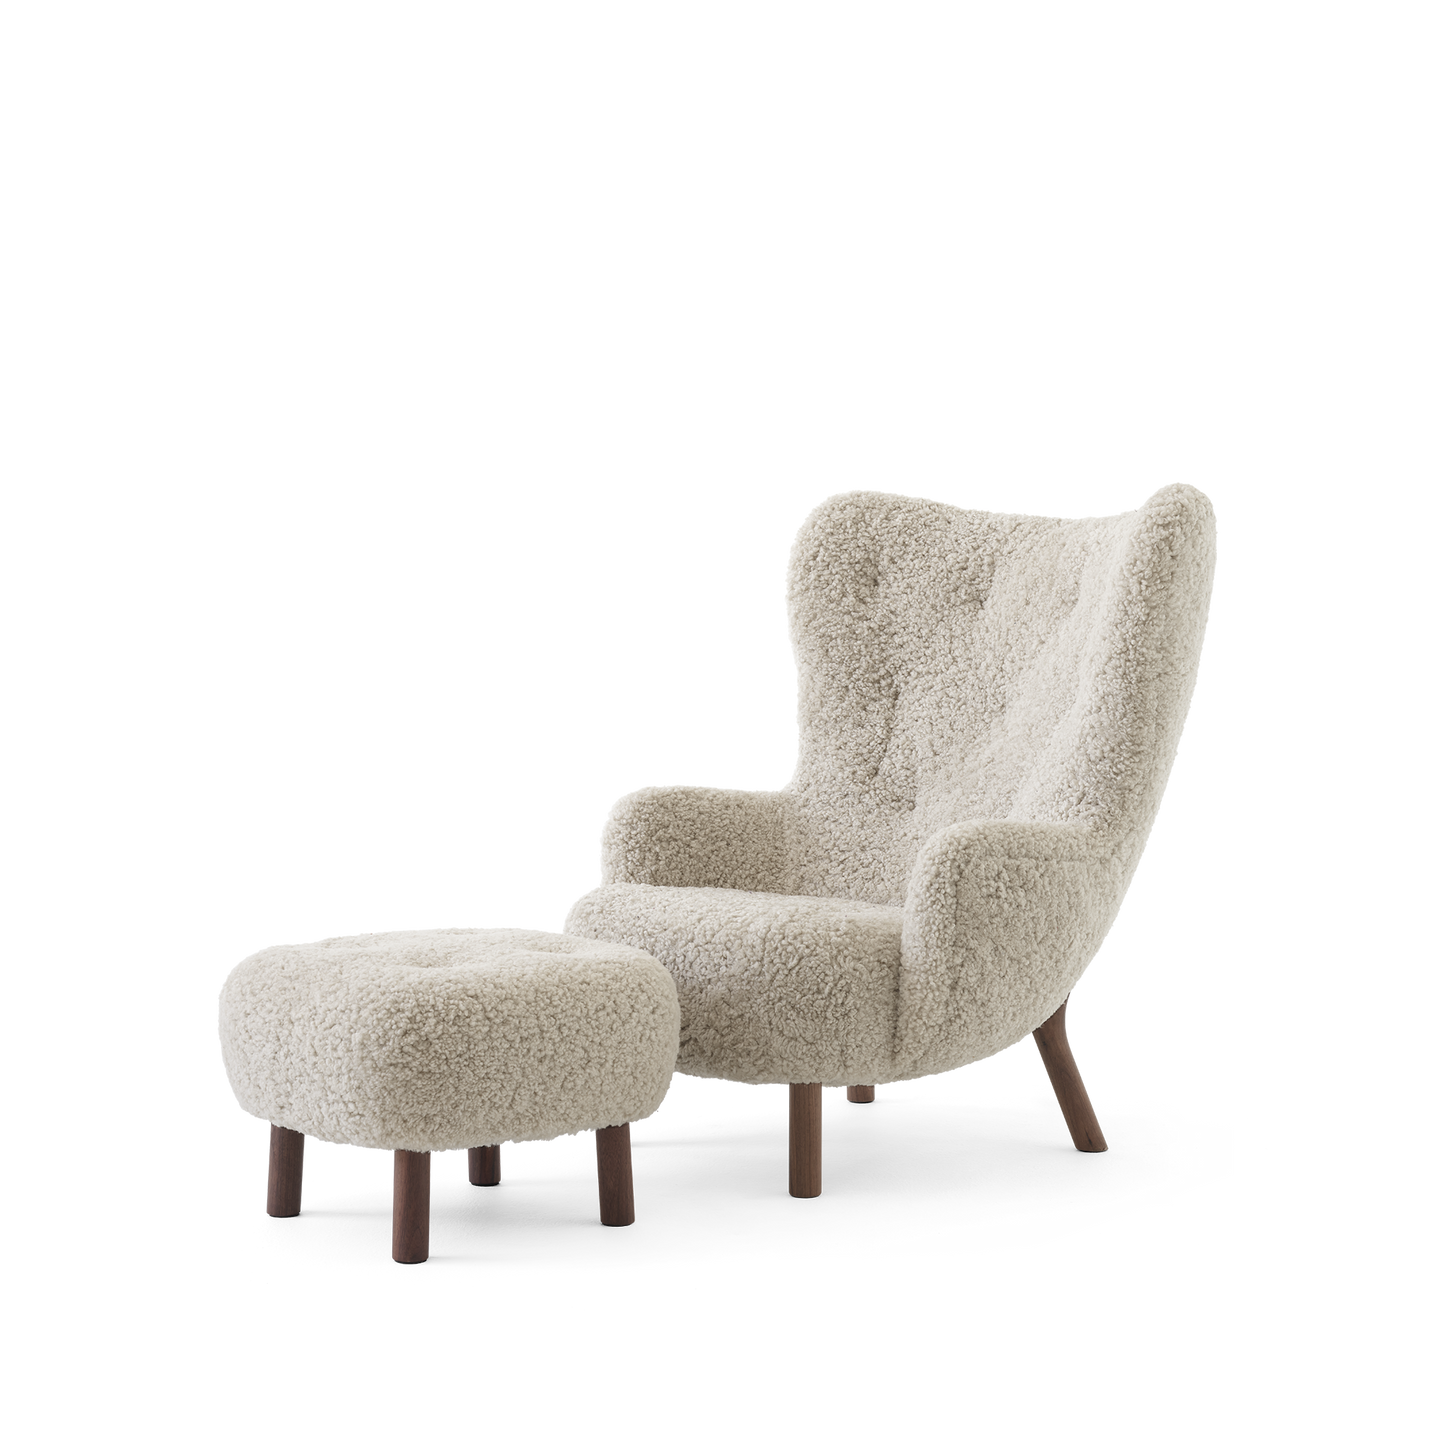 Petra VB3 Armchair by &tradition #Sheepskin Moonlight/Oiled Walnut Incl. ATD1 Puff